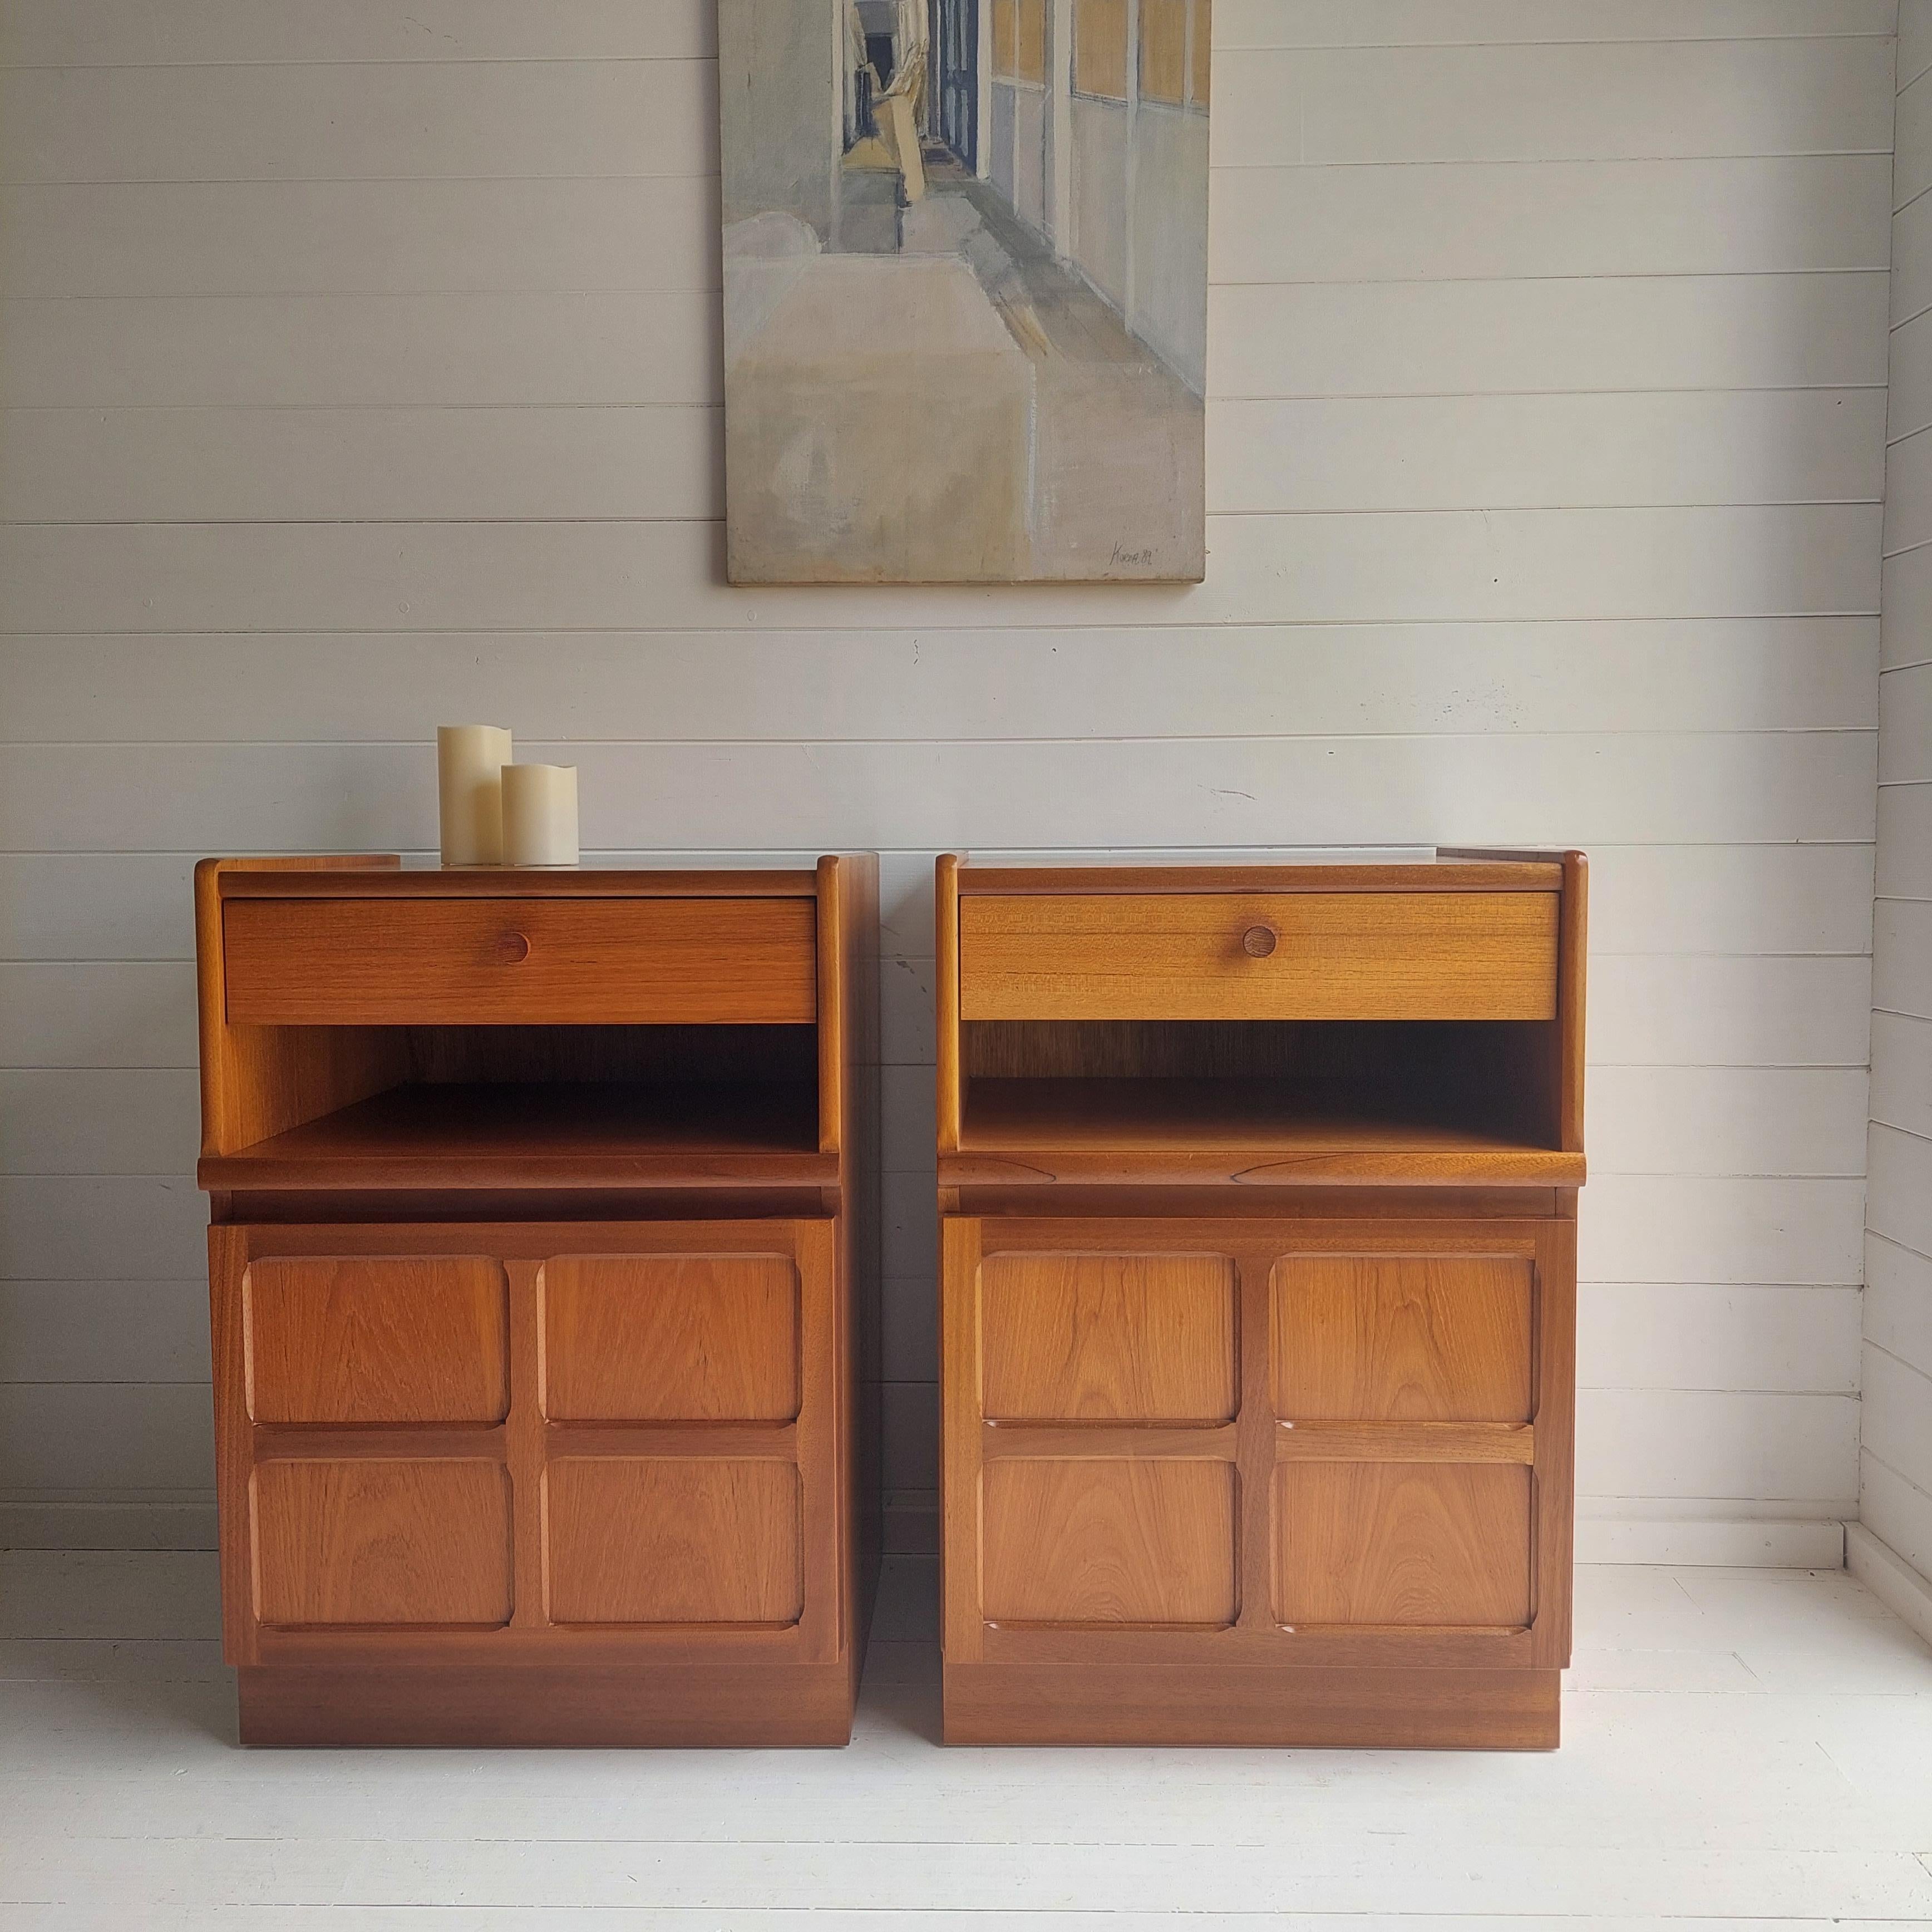 A great 1970s Nathan teak bedside tables.
Pair of bedside cabinets manufactured in the UK by Nathan, Parker Knoll.

They have a single drawer at the top that all slide well, underneath there is a shelf and there is a handy cupboard bellow.
The